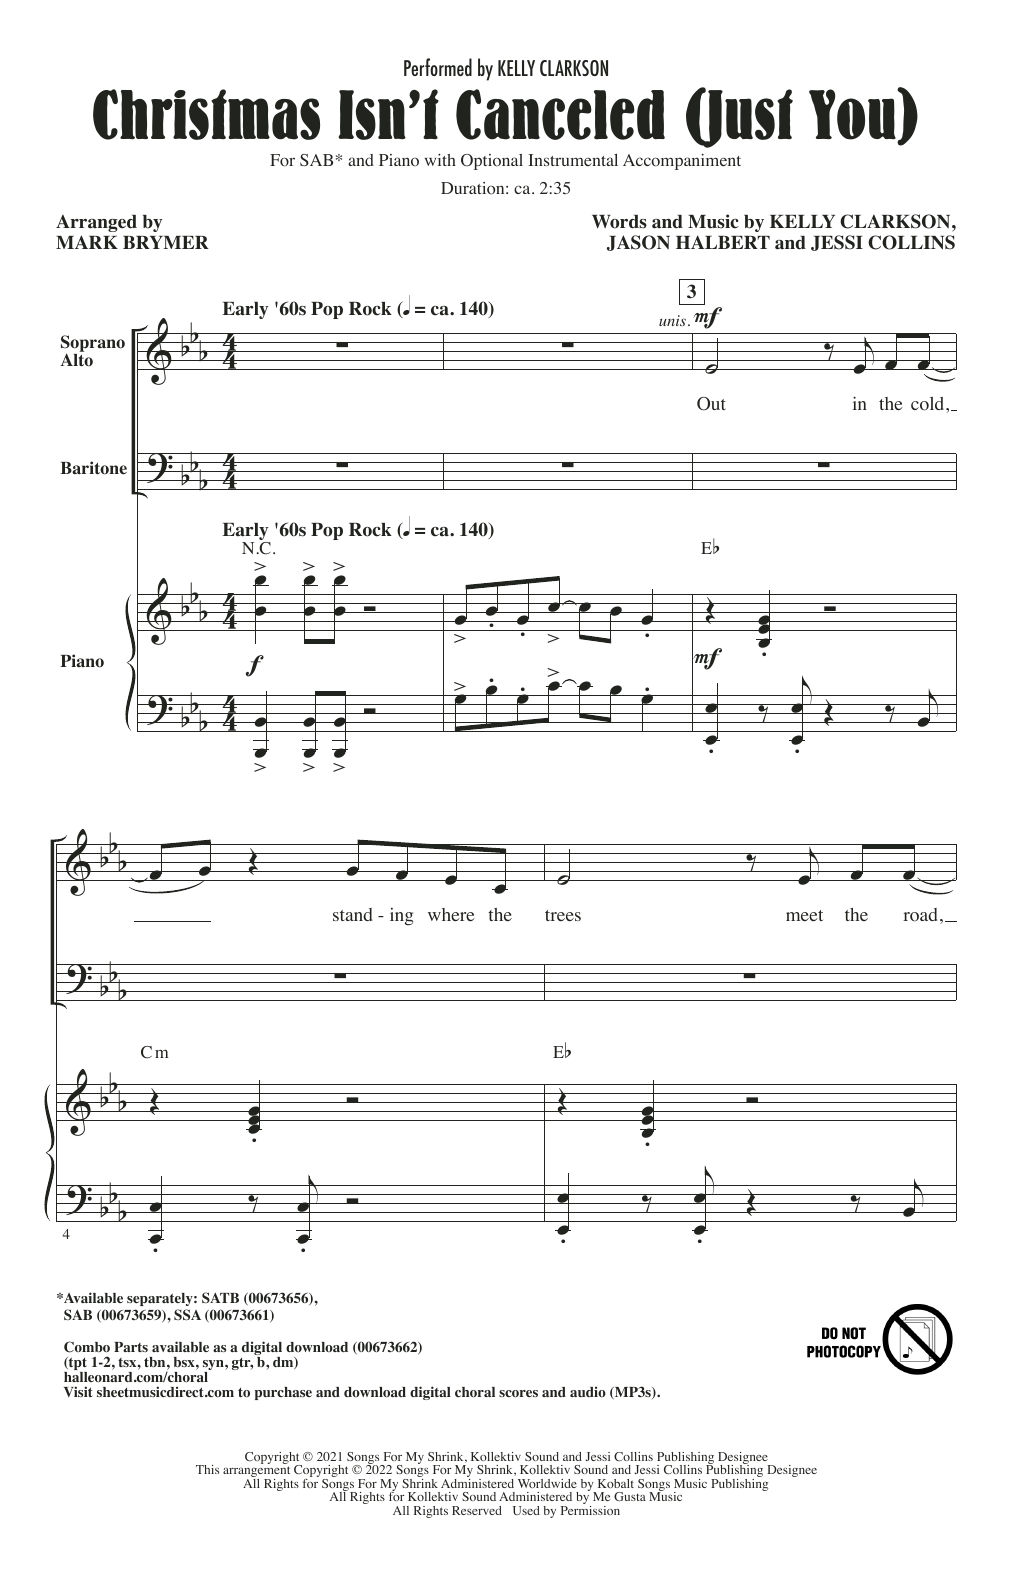 Download Kelly Clarkson Christmas Isn't Canceled (Just You) (ar Sheet Music